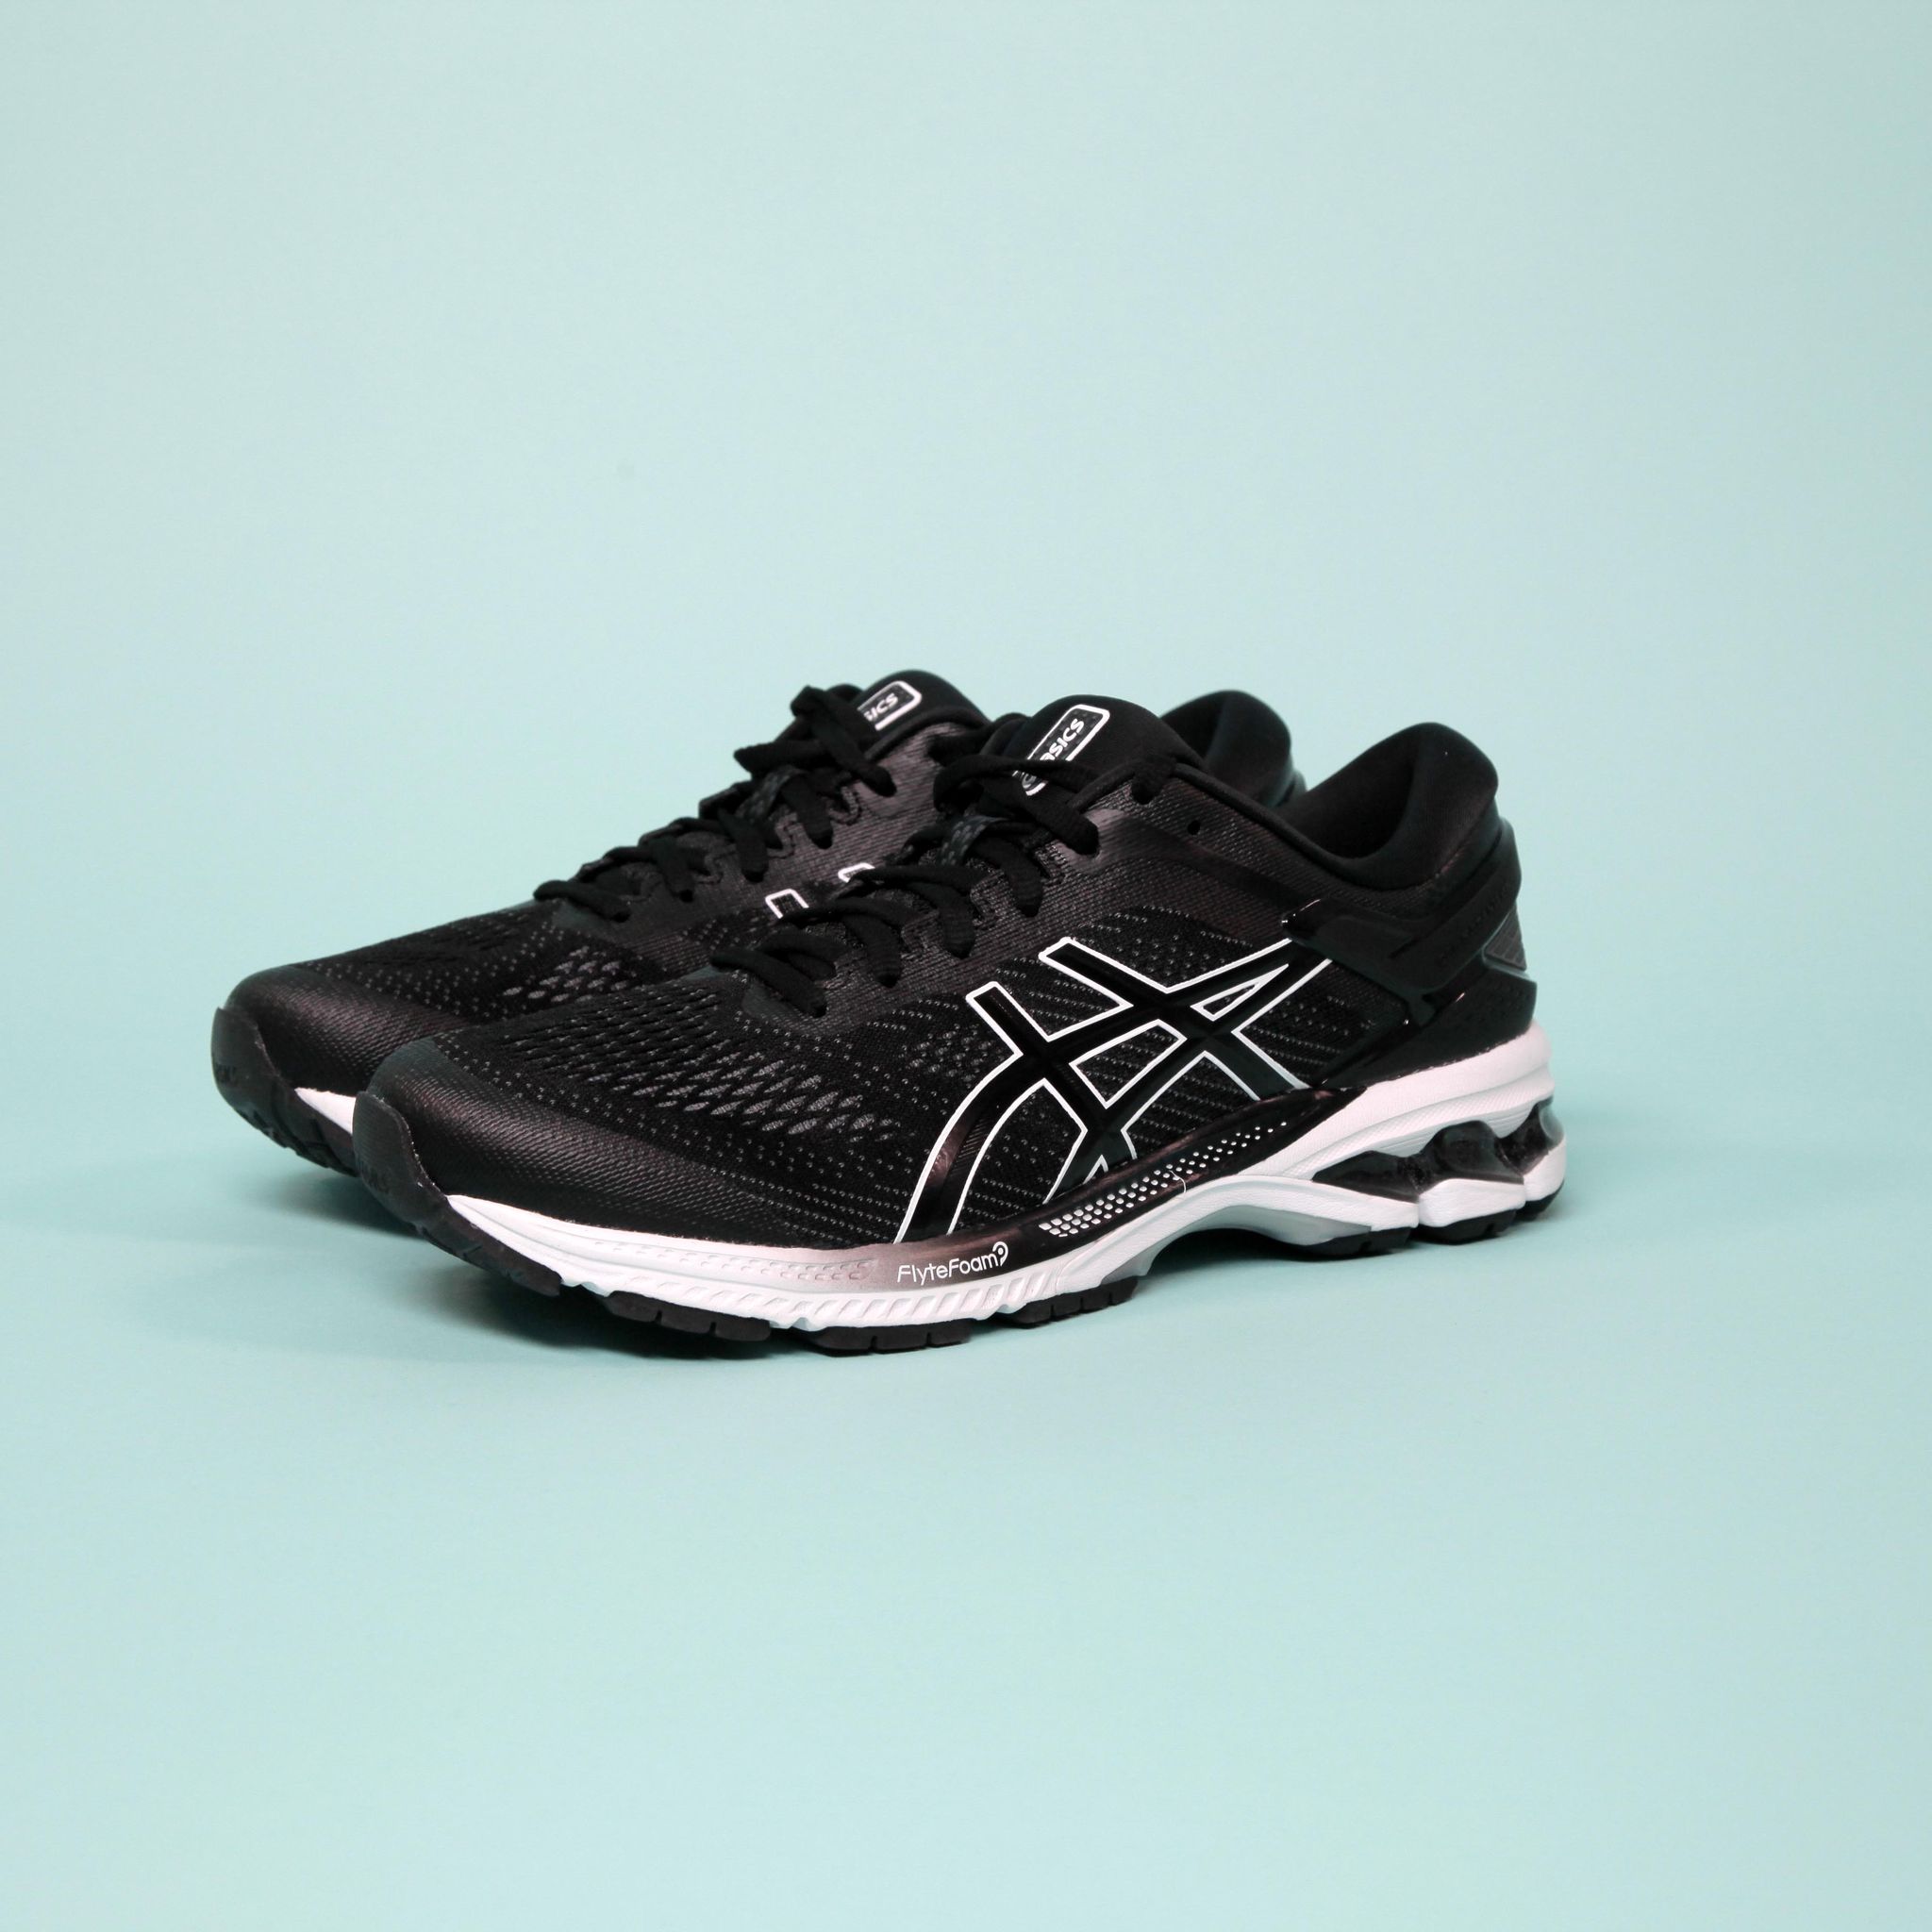 The Asics Gel Kayano 26 is a reliable shoe for overpronators for whom  comfort is key